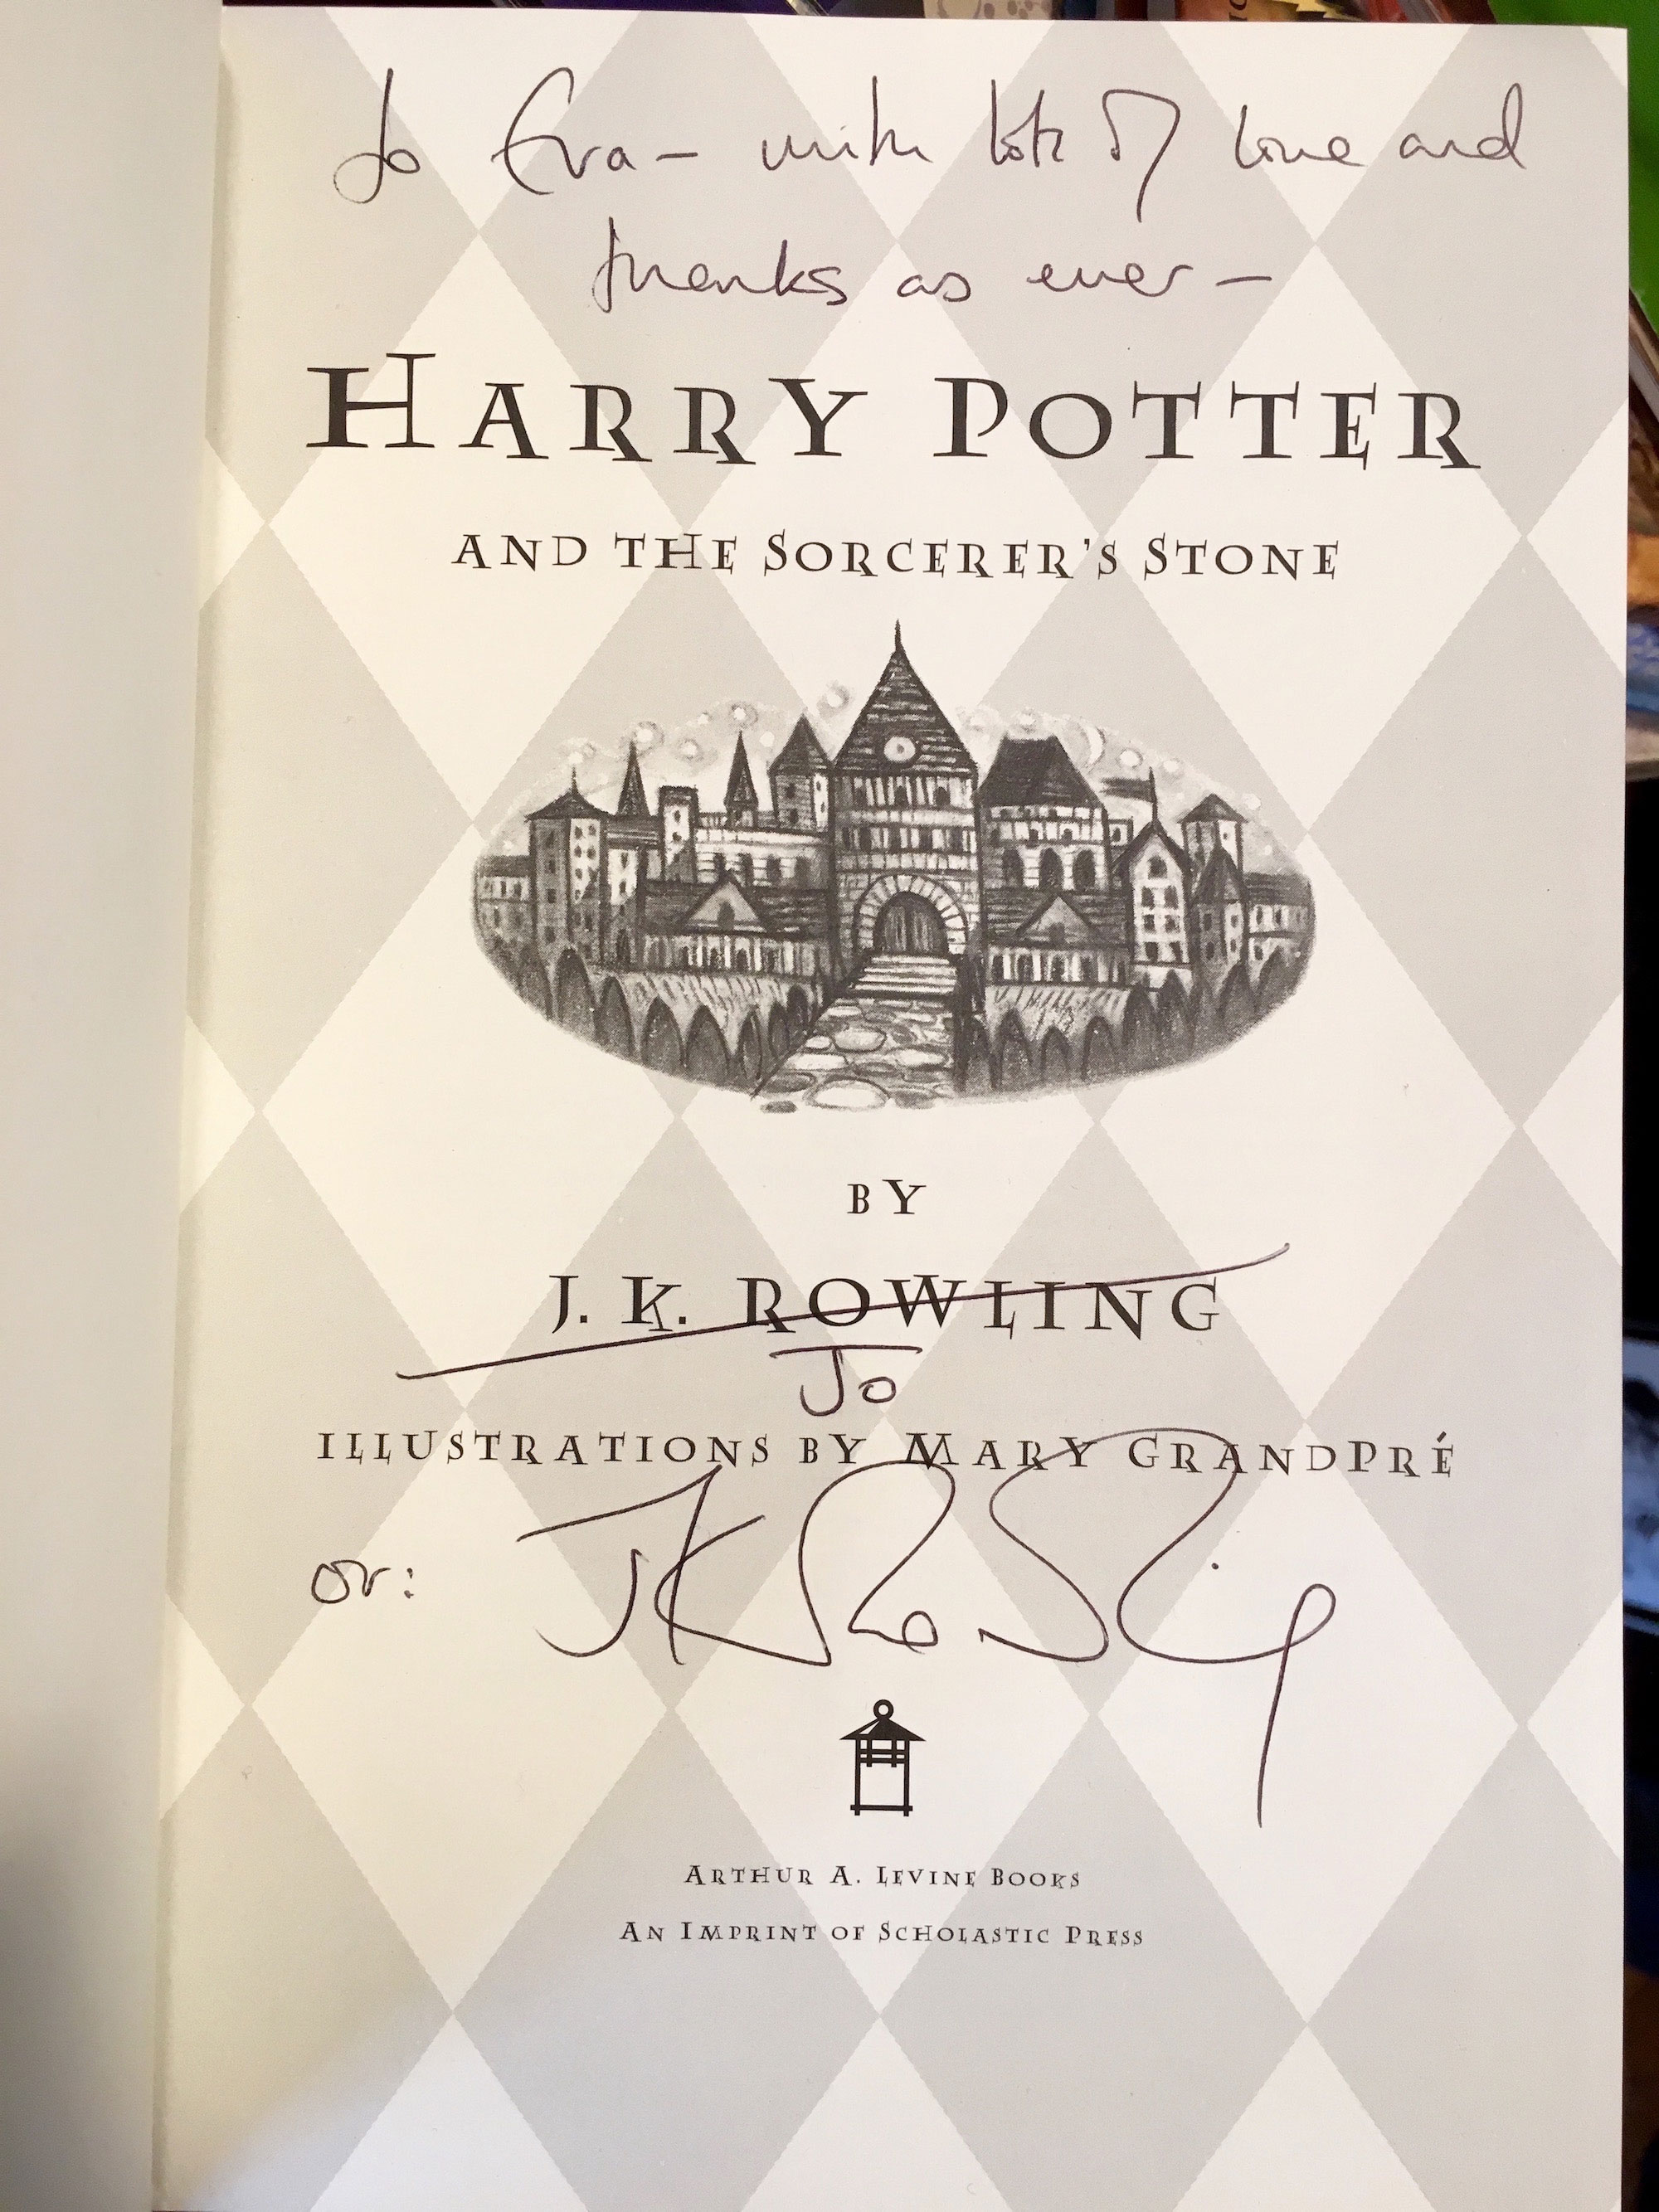 Collector’s edition signed to J.K. Rowling’s nanny